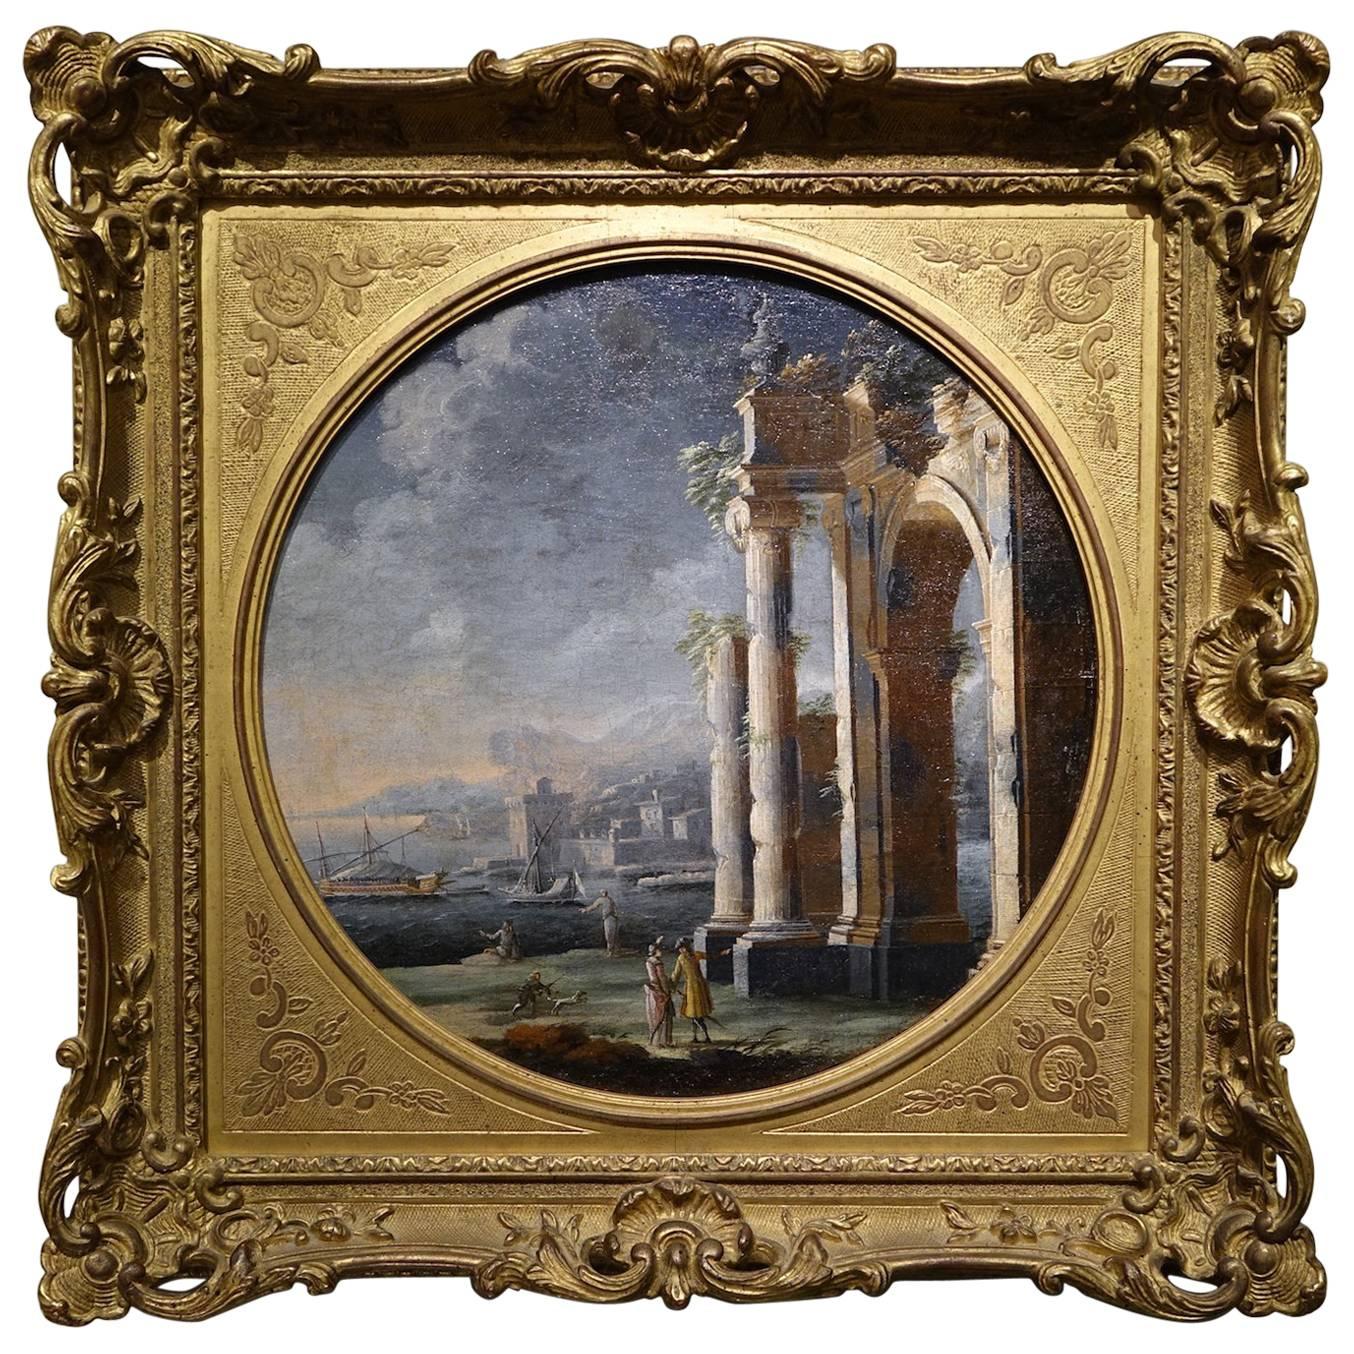 Ancient Ruins, Oil on Canvas Attributed to Leonardo Coccorante, Italy 18th Centuy